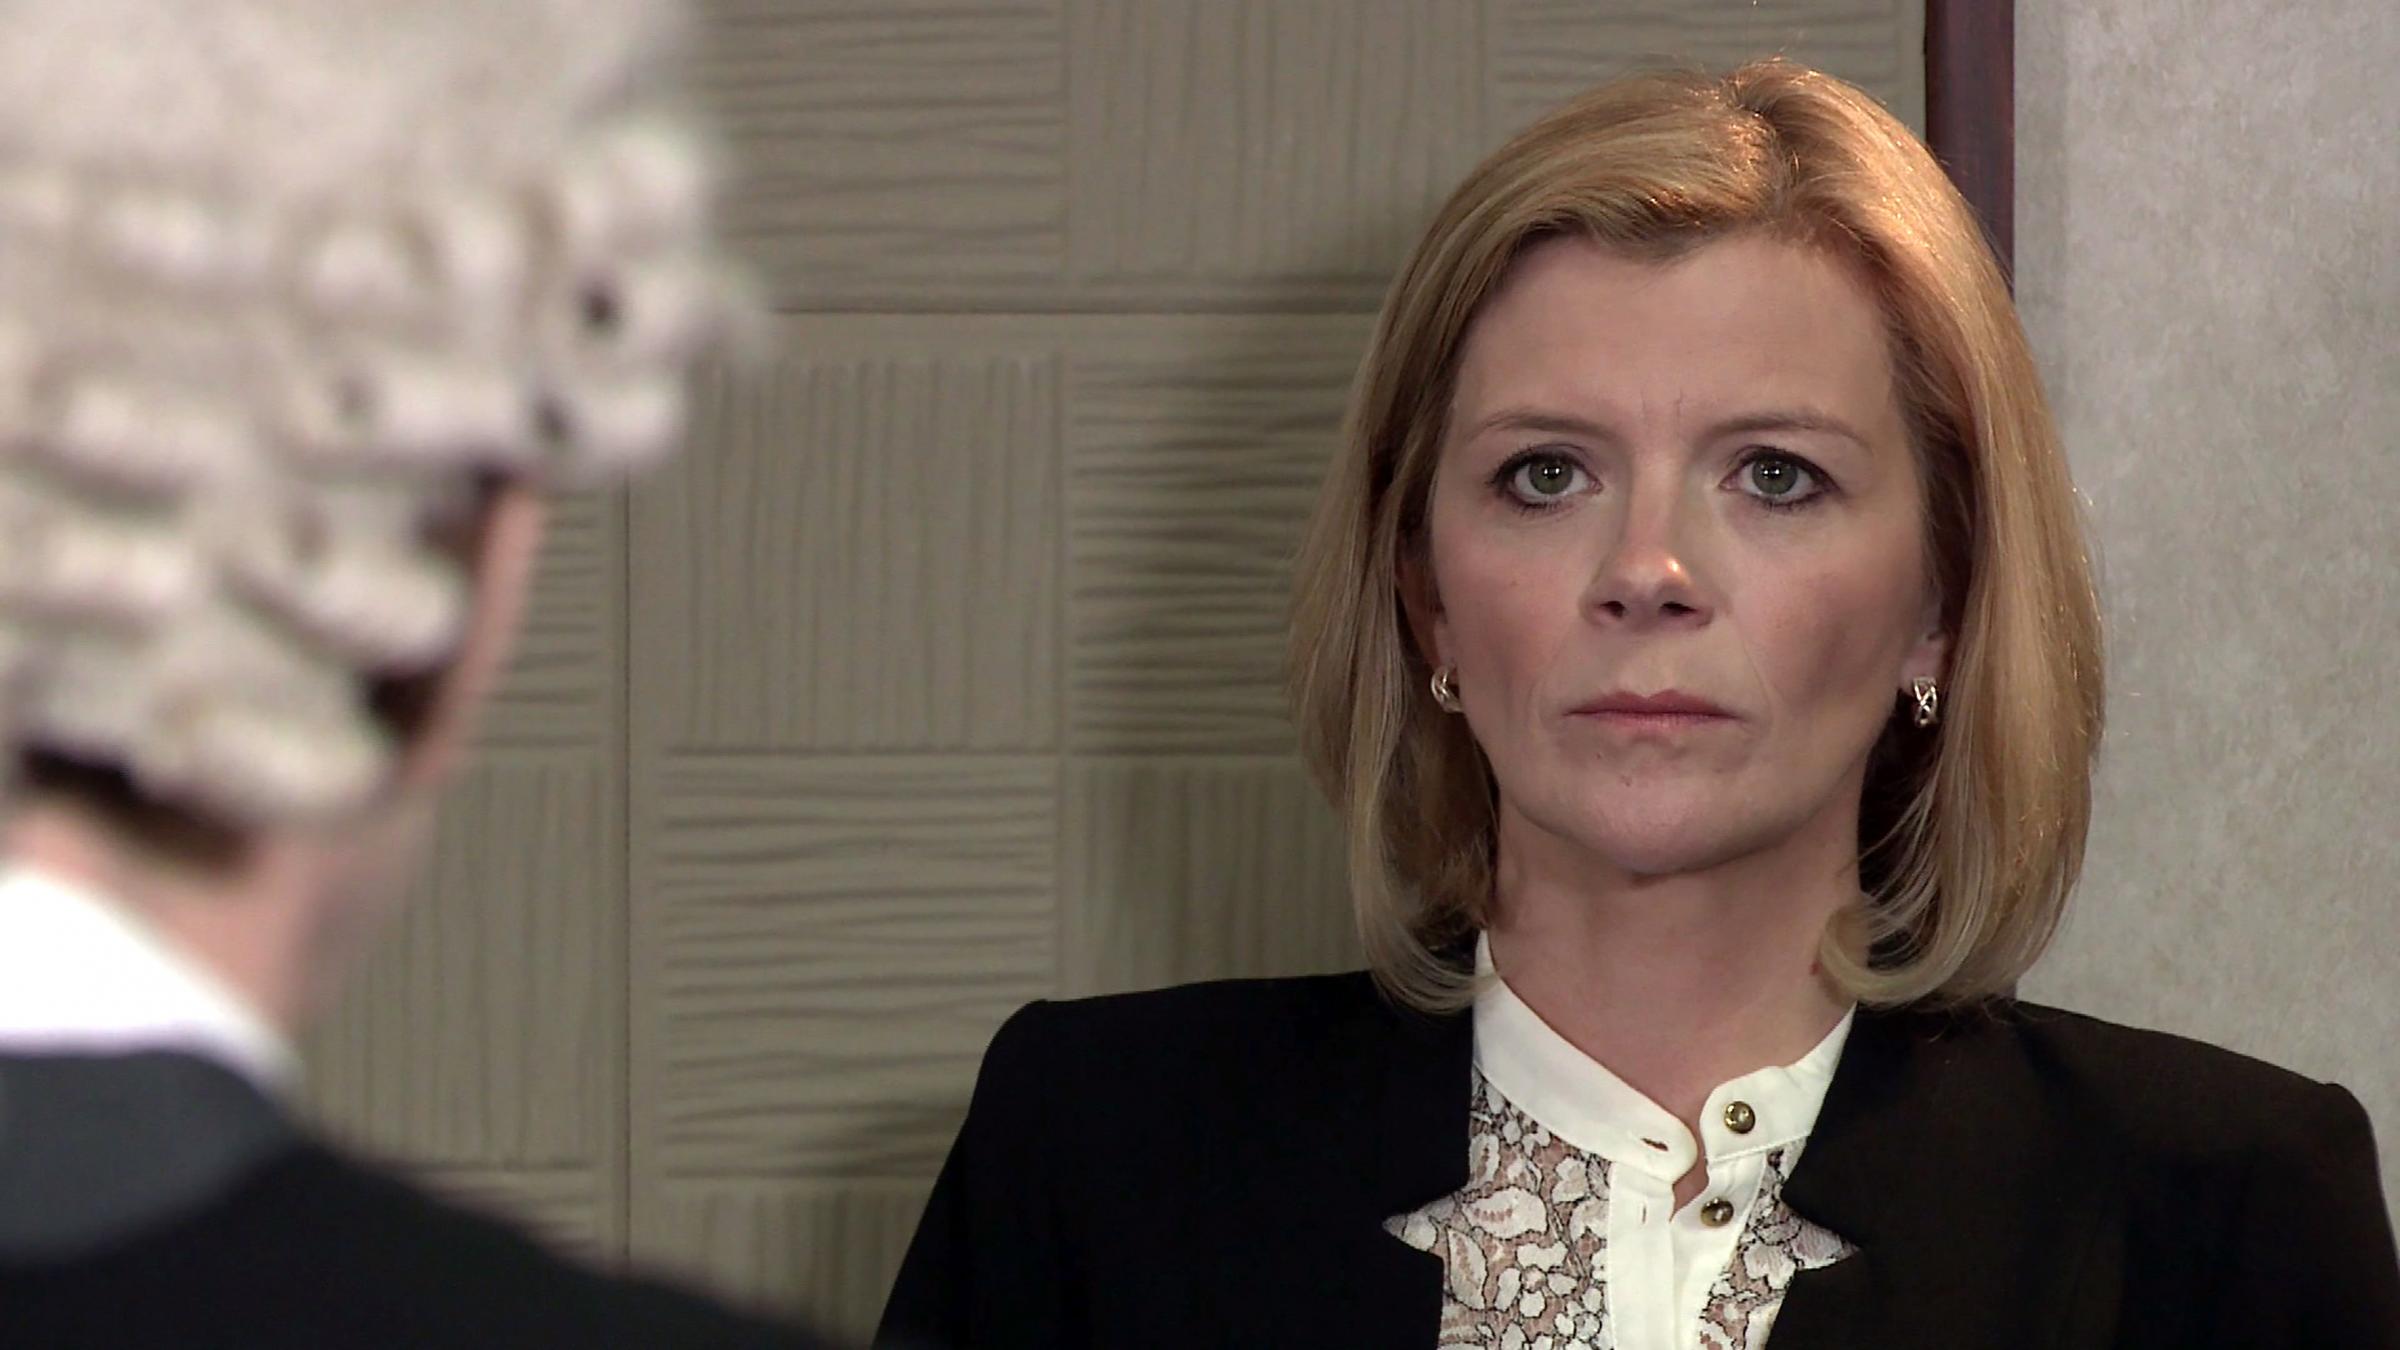 Coronation Street star: Leanne Battersby is terrified, and she’s just trying to do her best